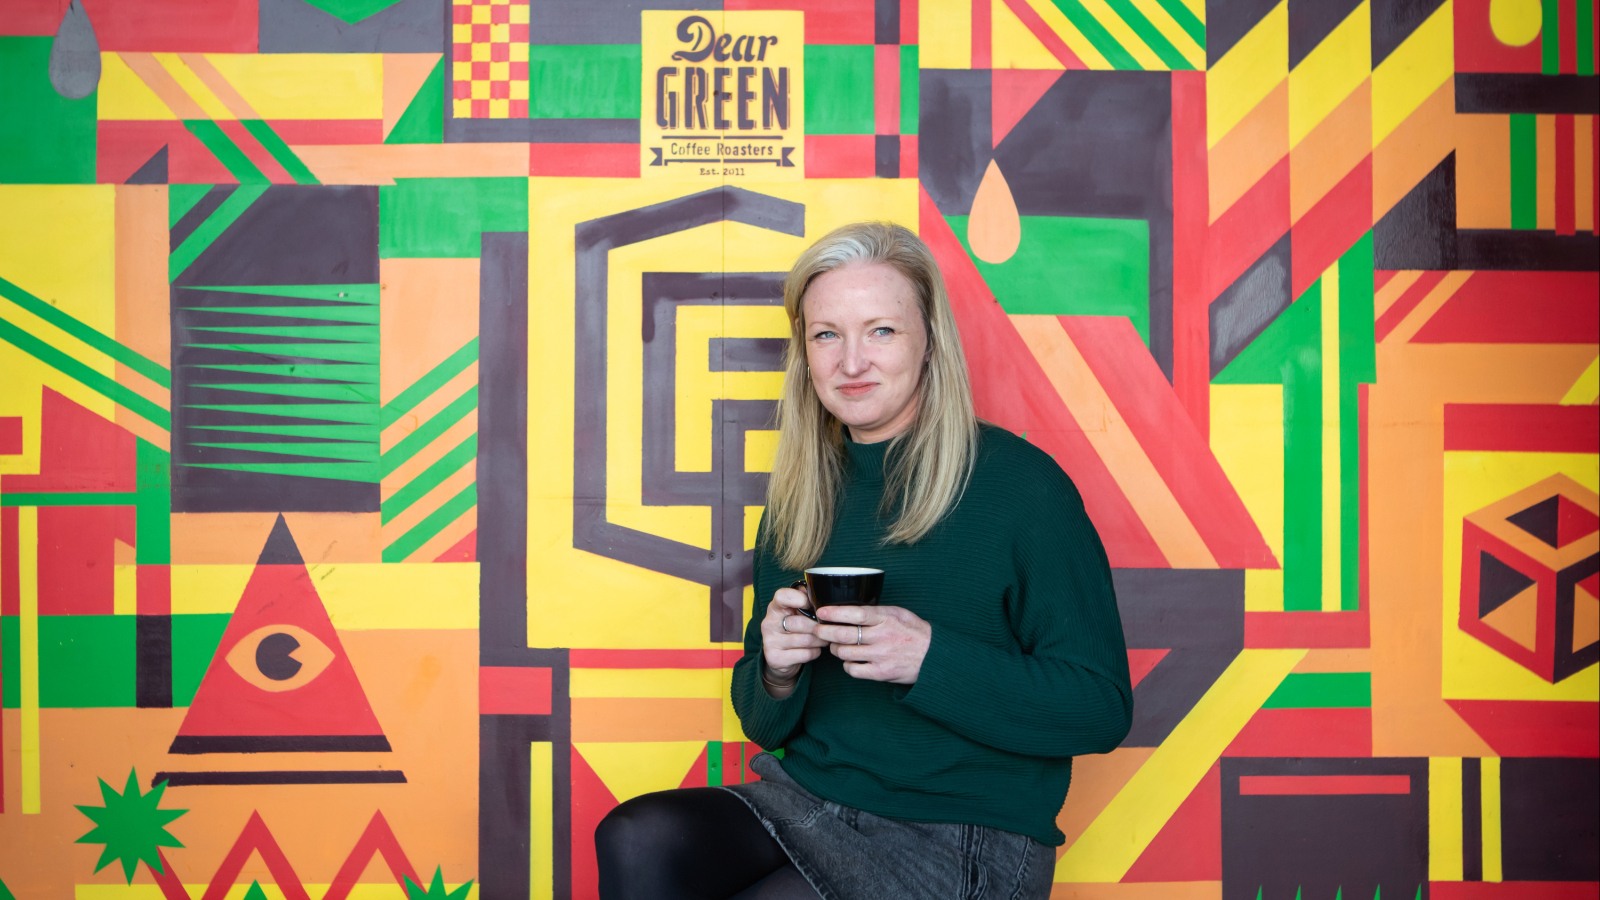 Lisa Lawson is the founder of Dear Green Coffee Roasters in Glasgow’s east end.